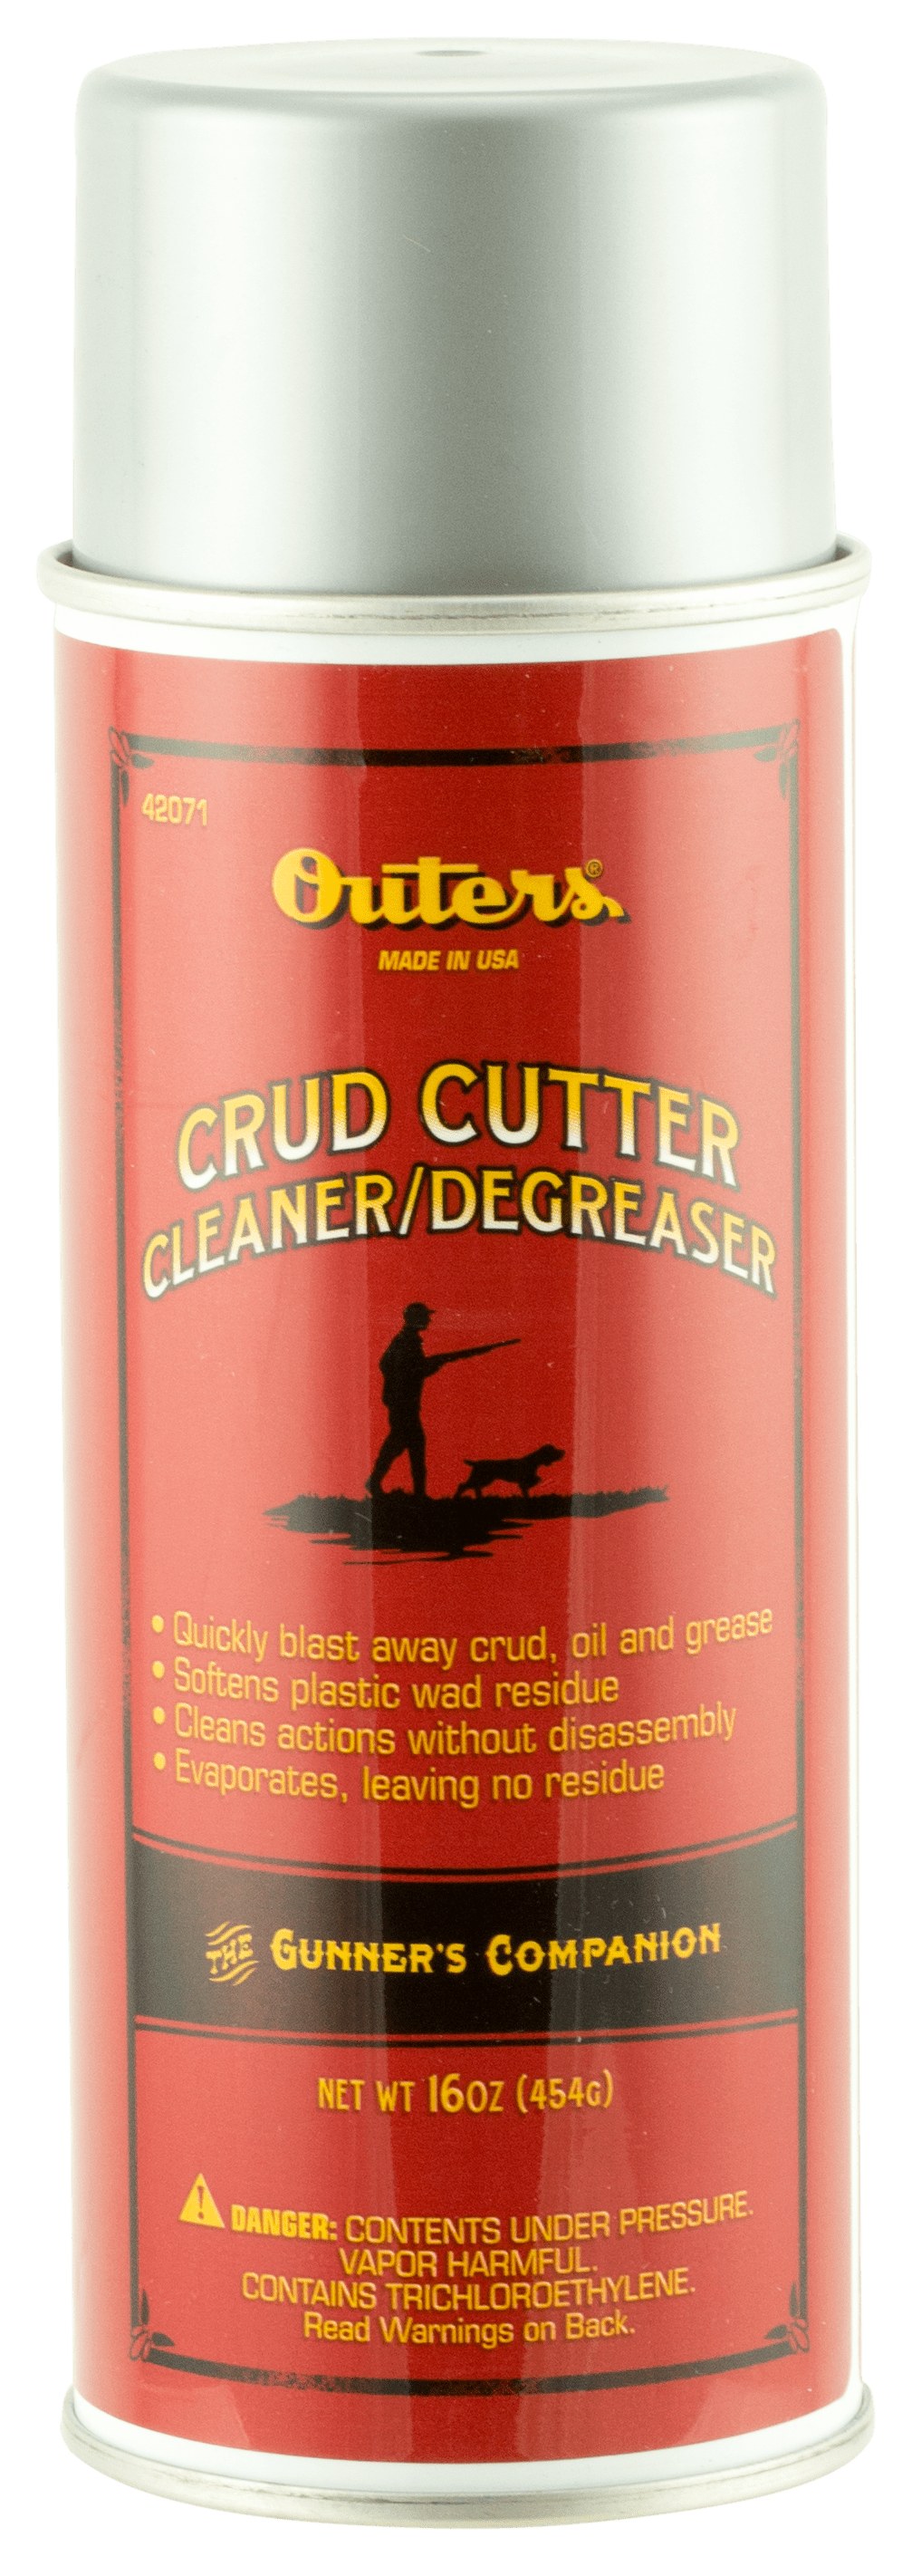 Uncle Mike's Outers Crud Cutter 14oz Cleaning Equipment